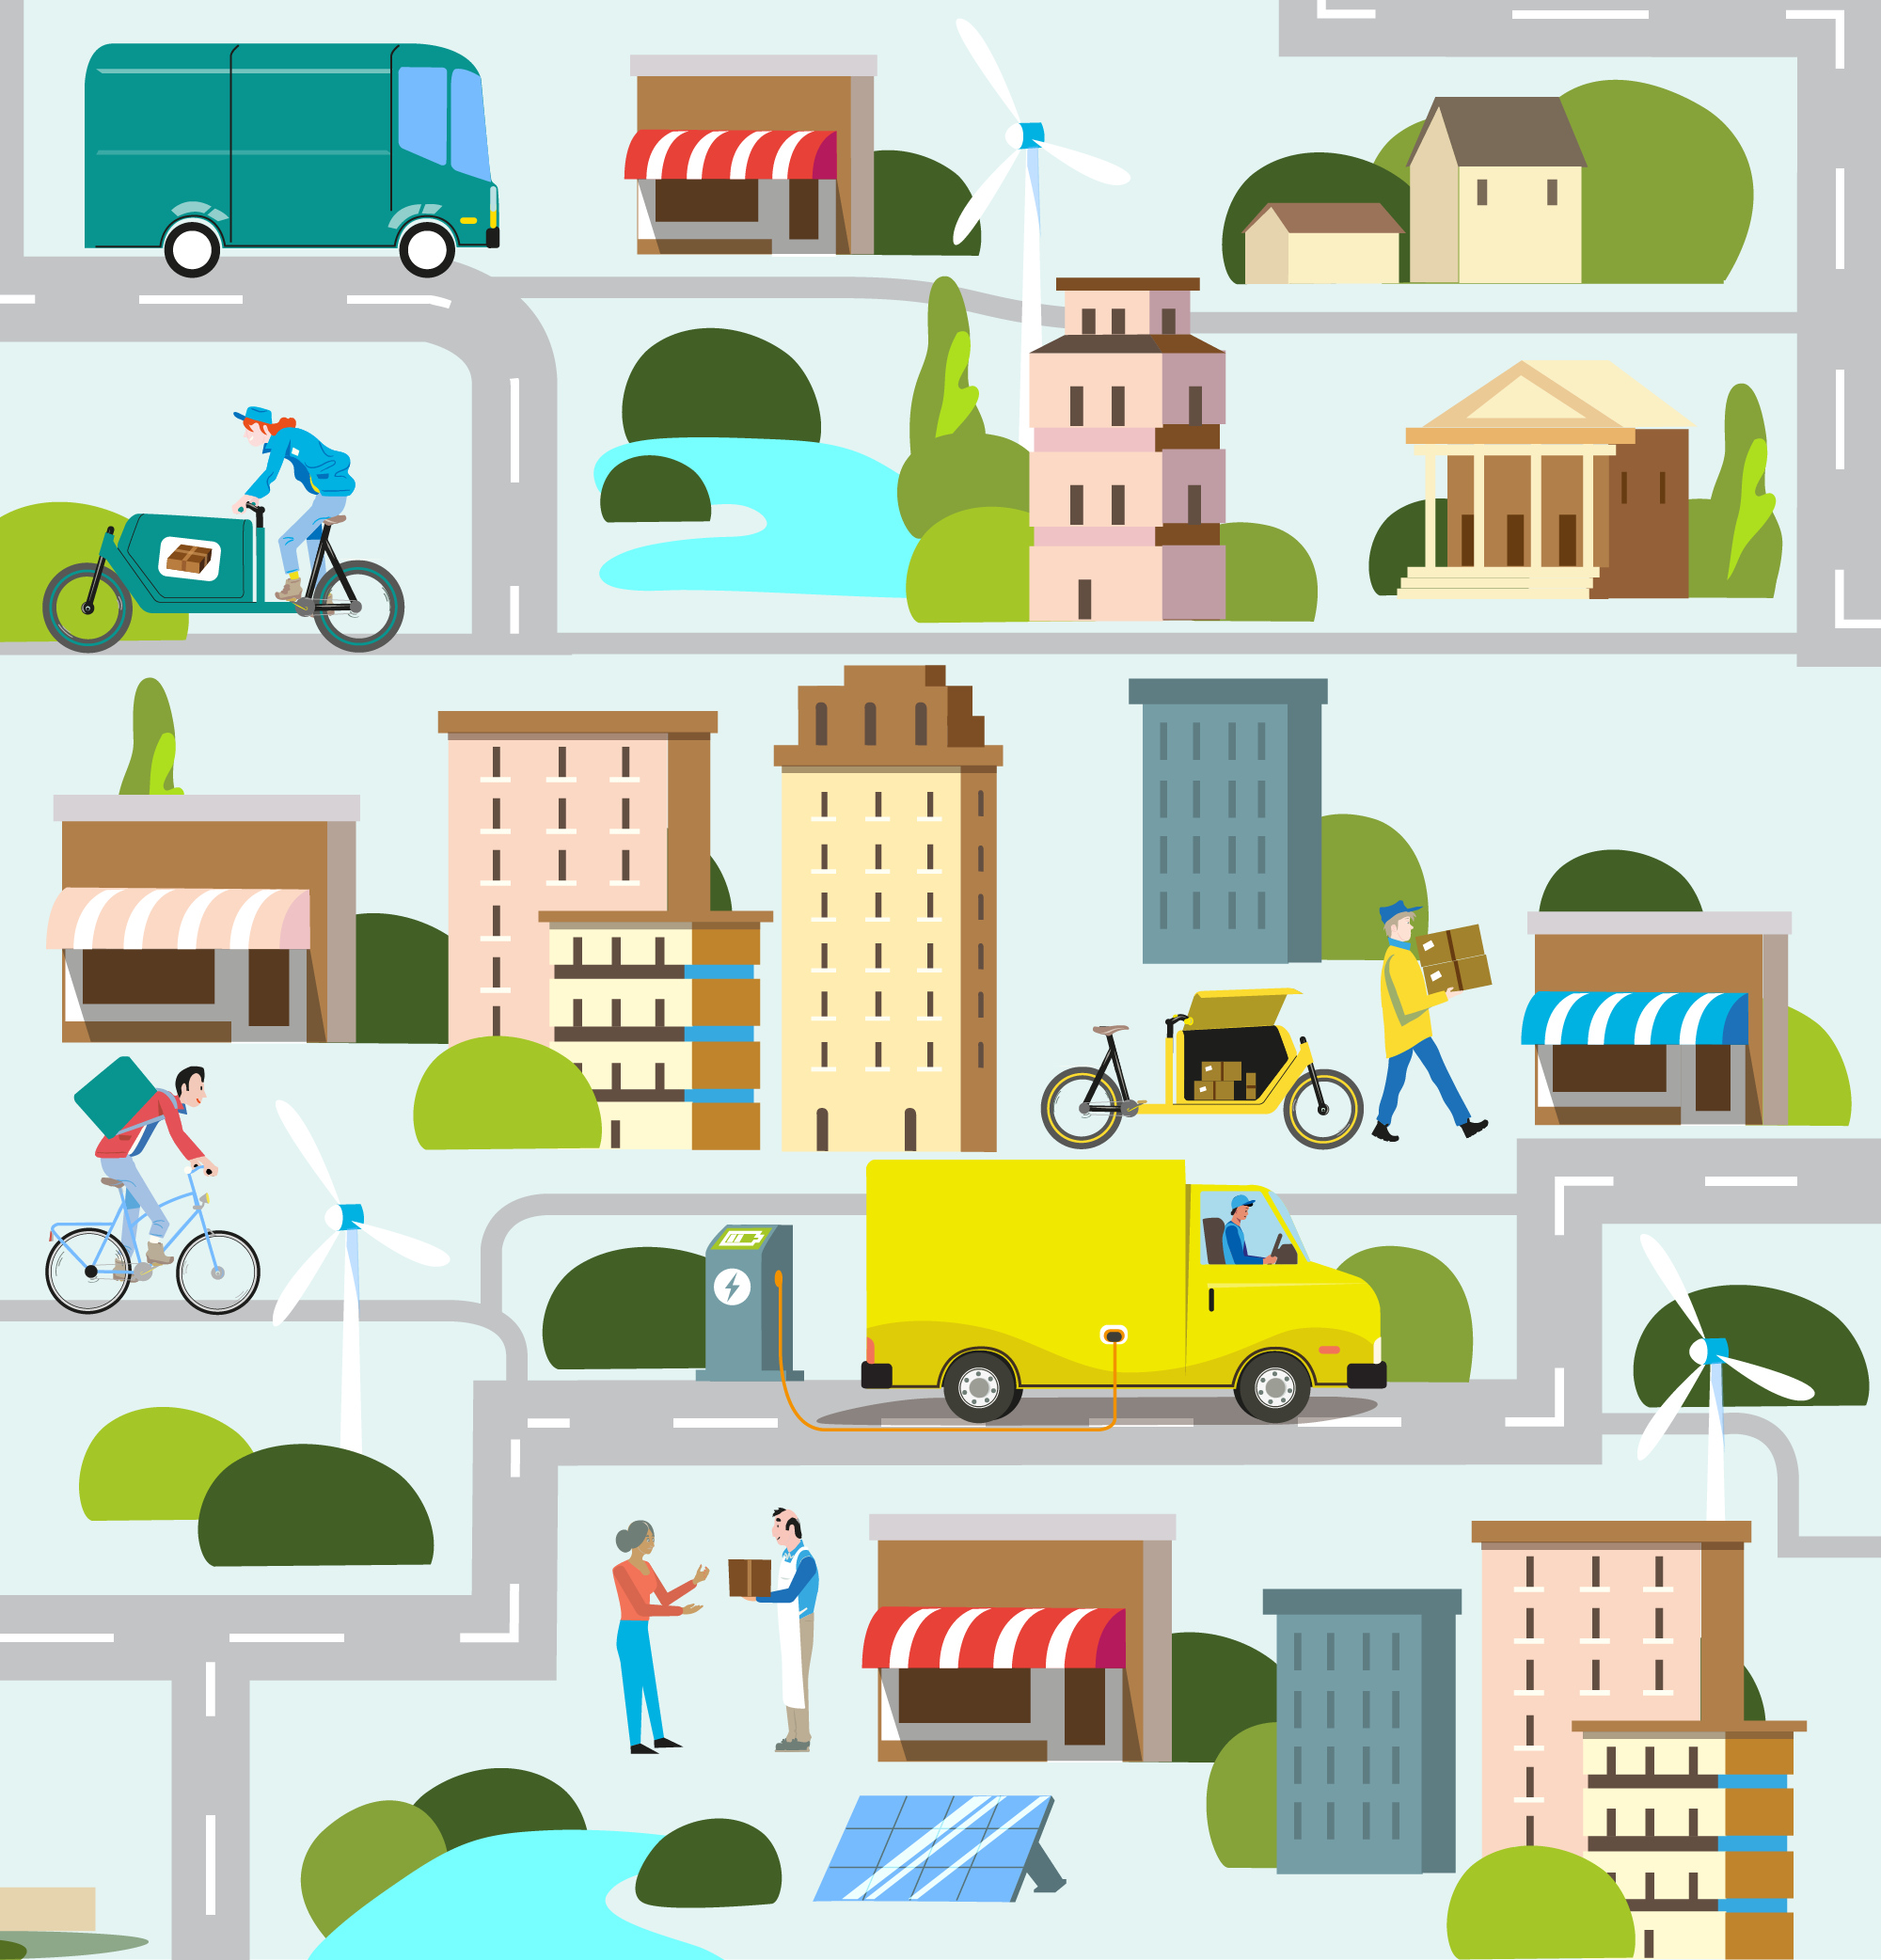 https://sustainablemobility.iclei.org/ecologistics/lcapufcities/